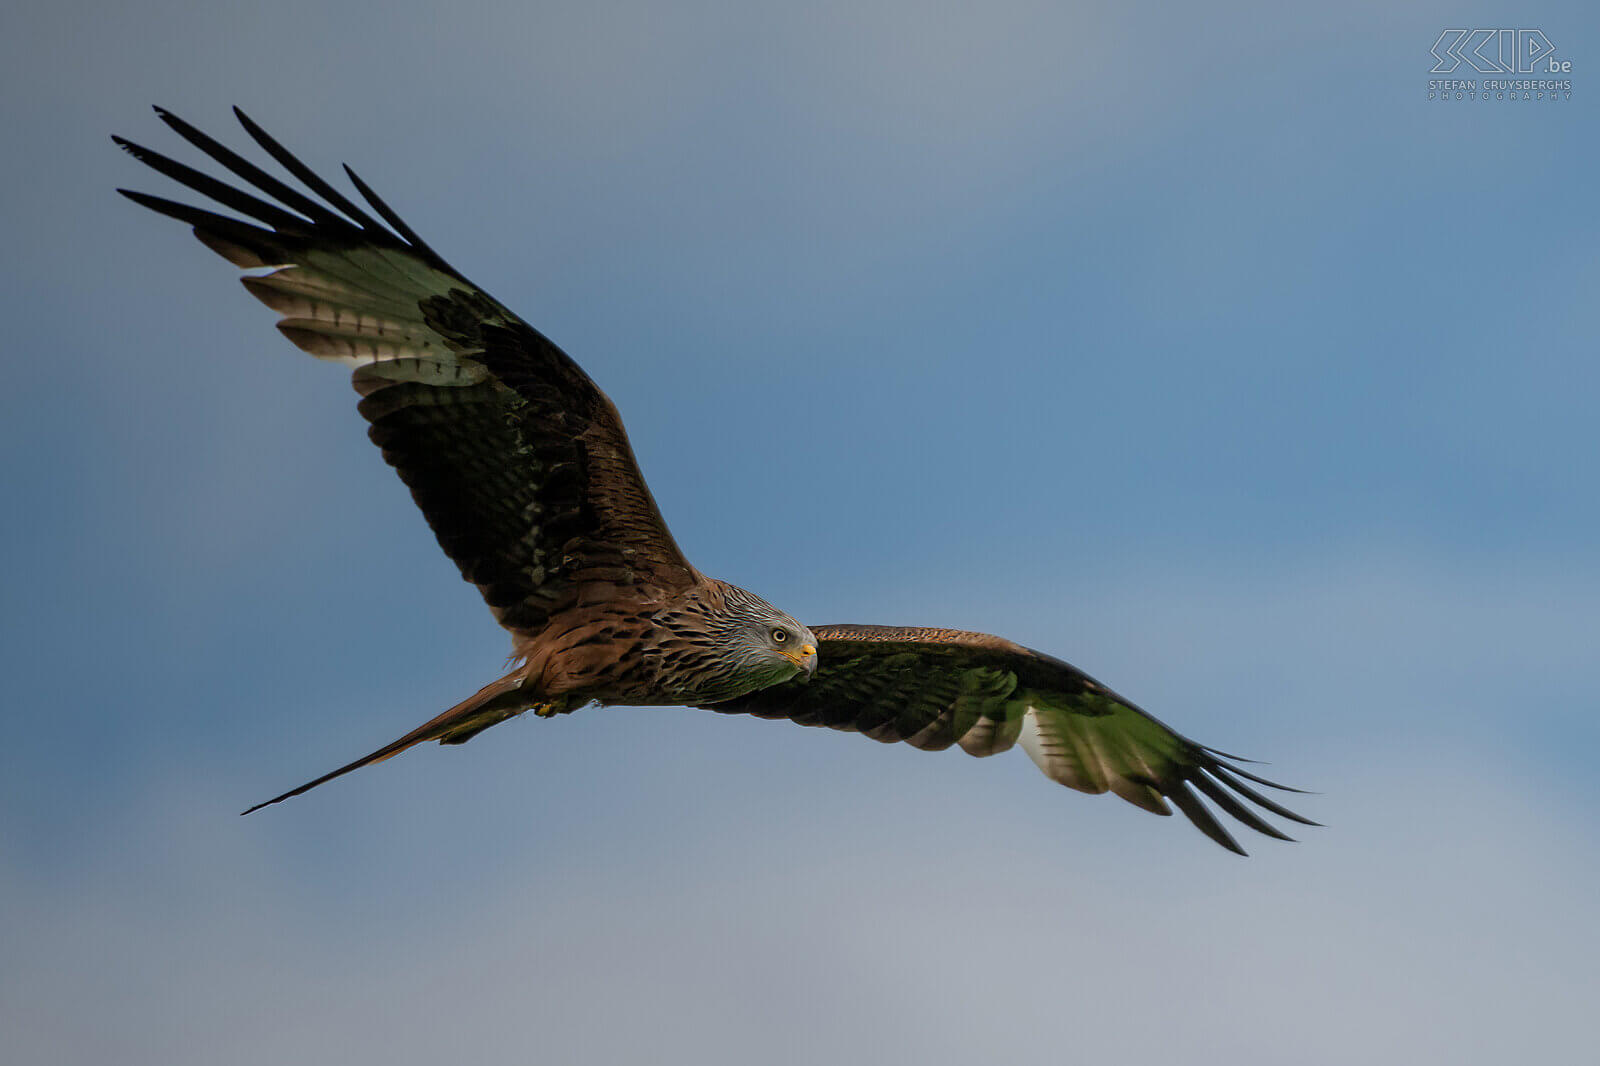 Argaty - Red kite The red kite can mainly be recognized by its fork-shaped tail and the dorsal side is reddish-brown with dark spots. The wingspan is 140-170 cm. Stefan Cruysberghs